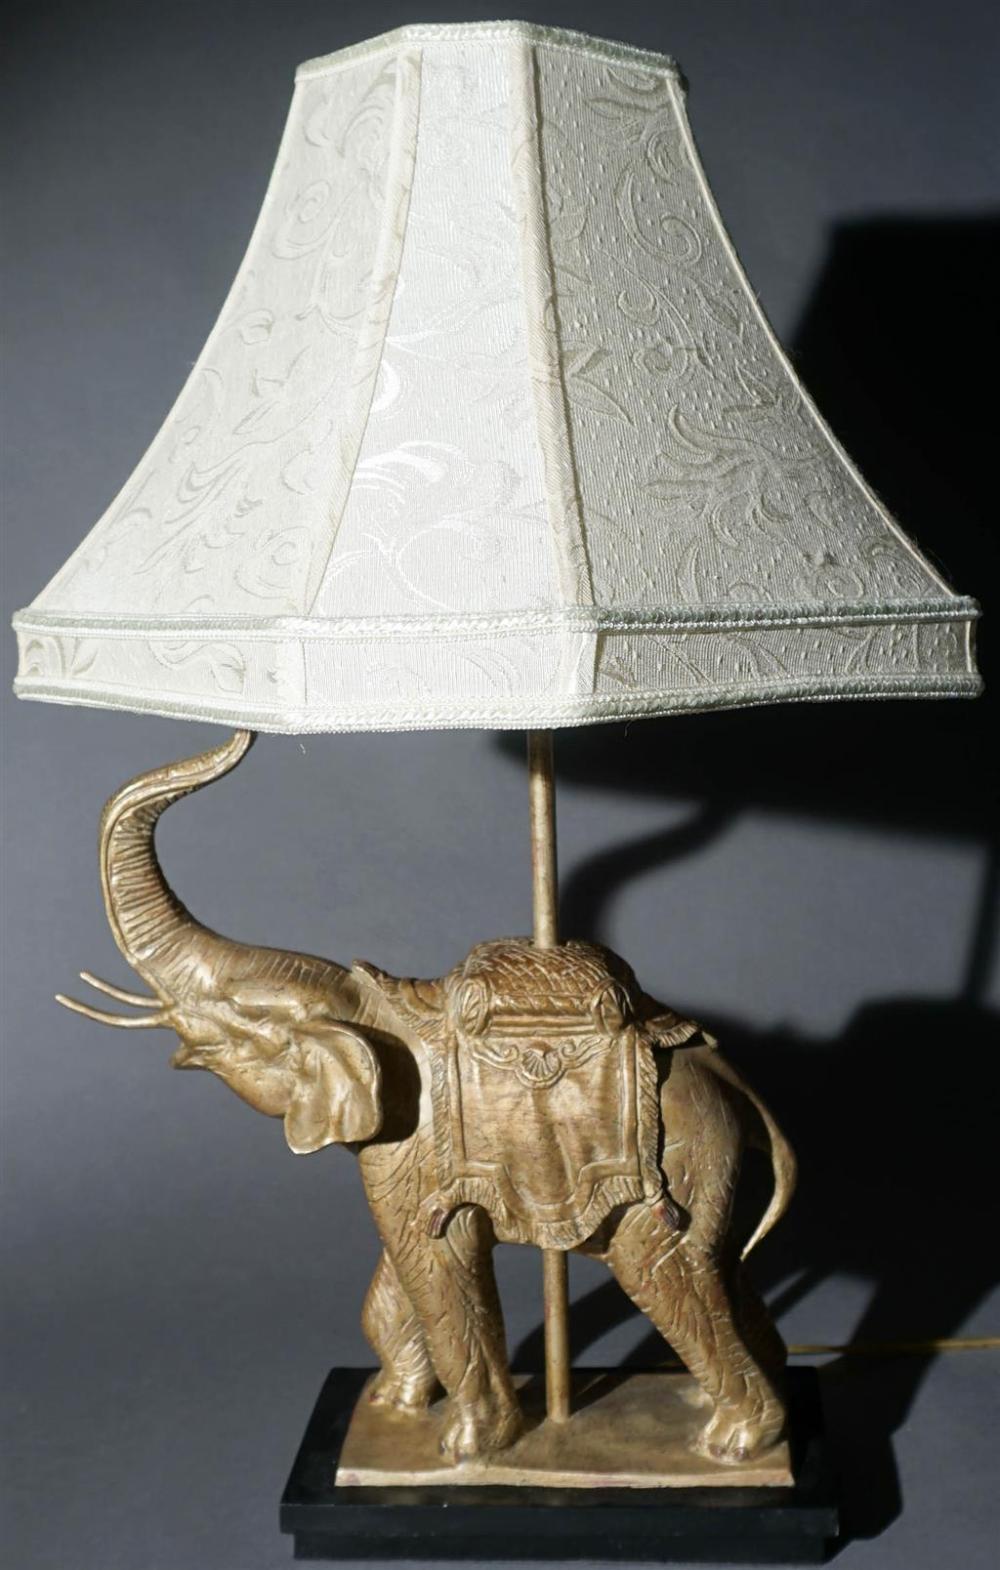 SILVER-GOLD PAINTED ELEPHANT TABLE